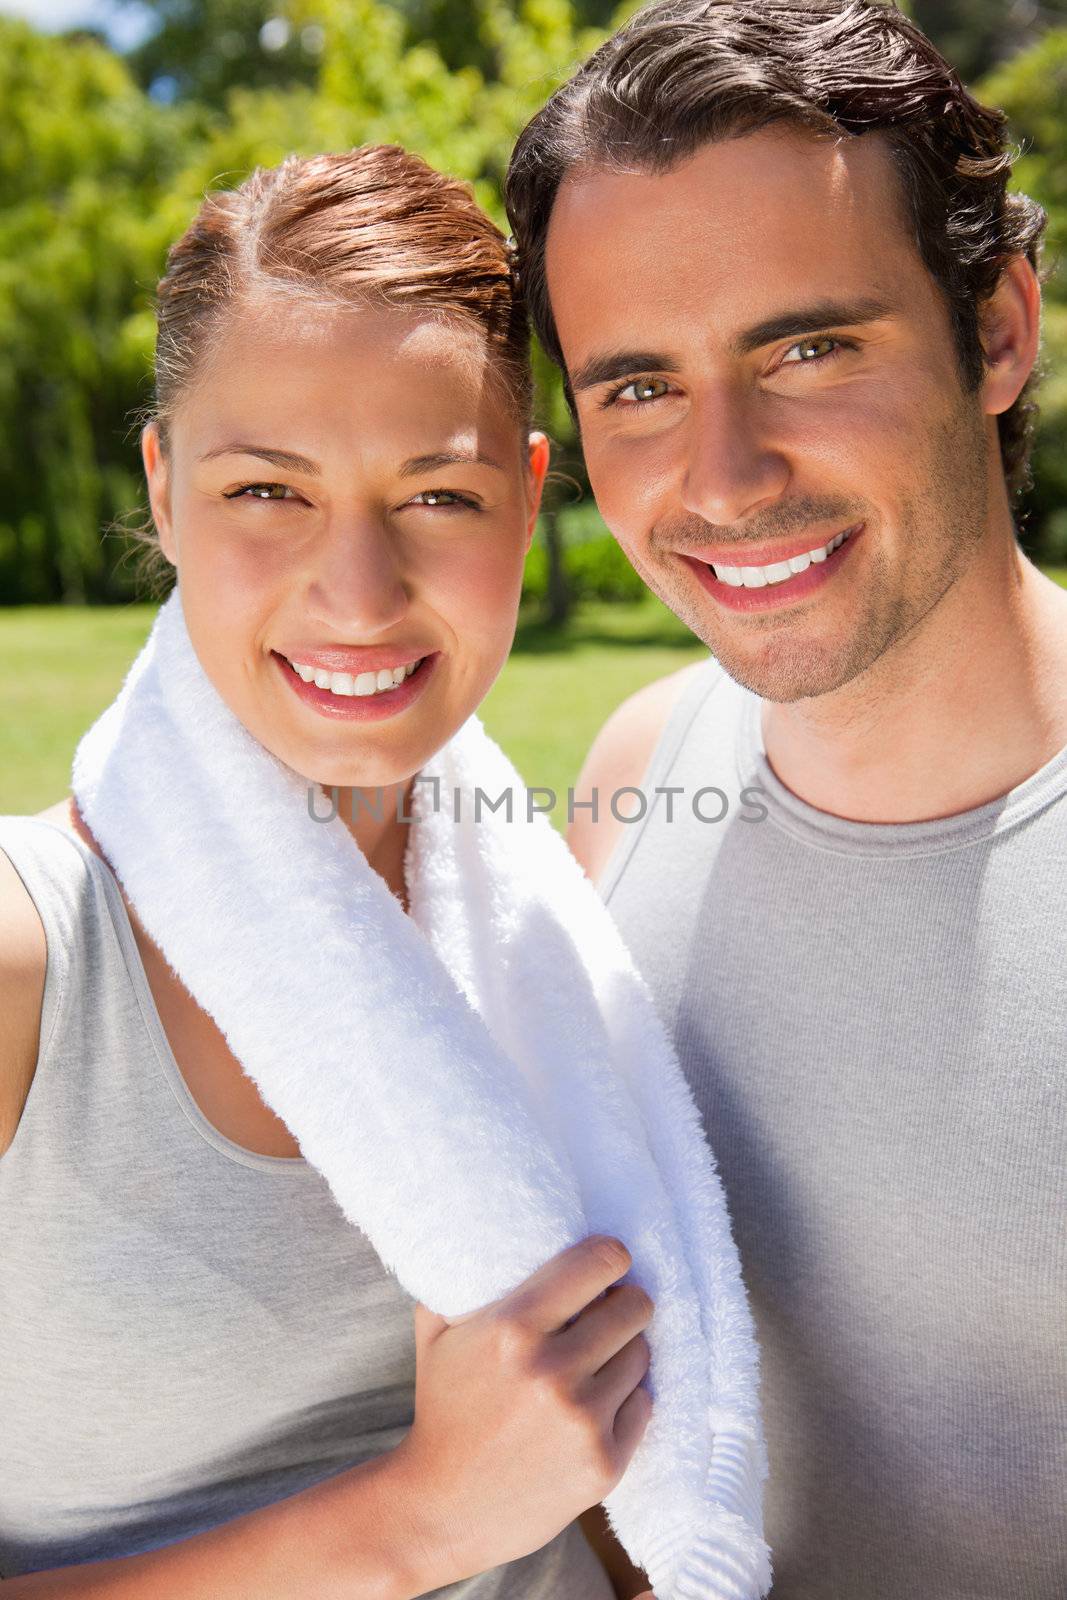 Woman holding a towel around her neck smiling with a man